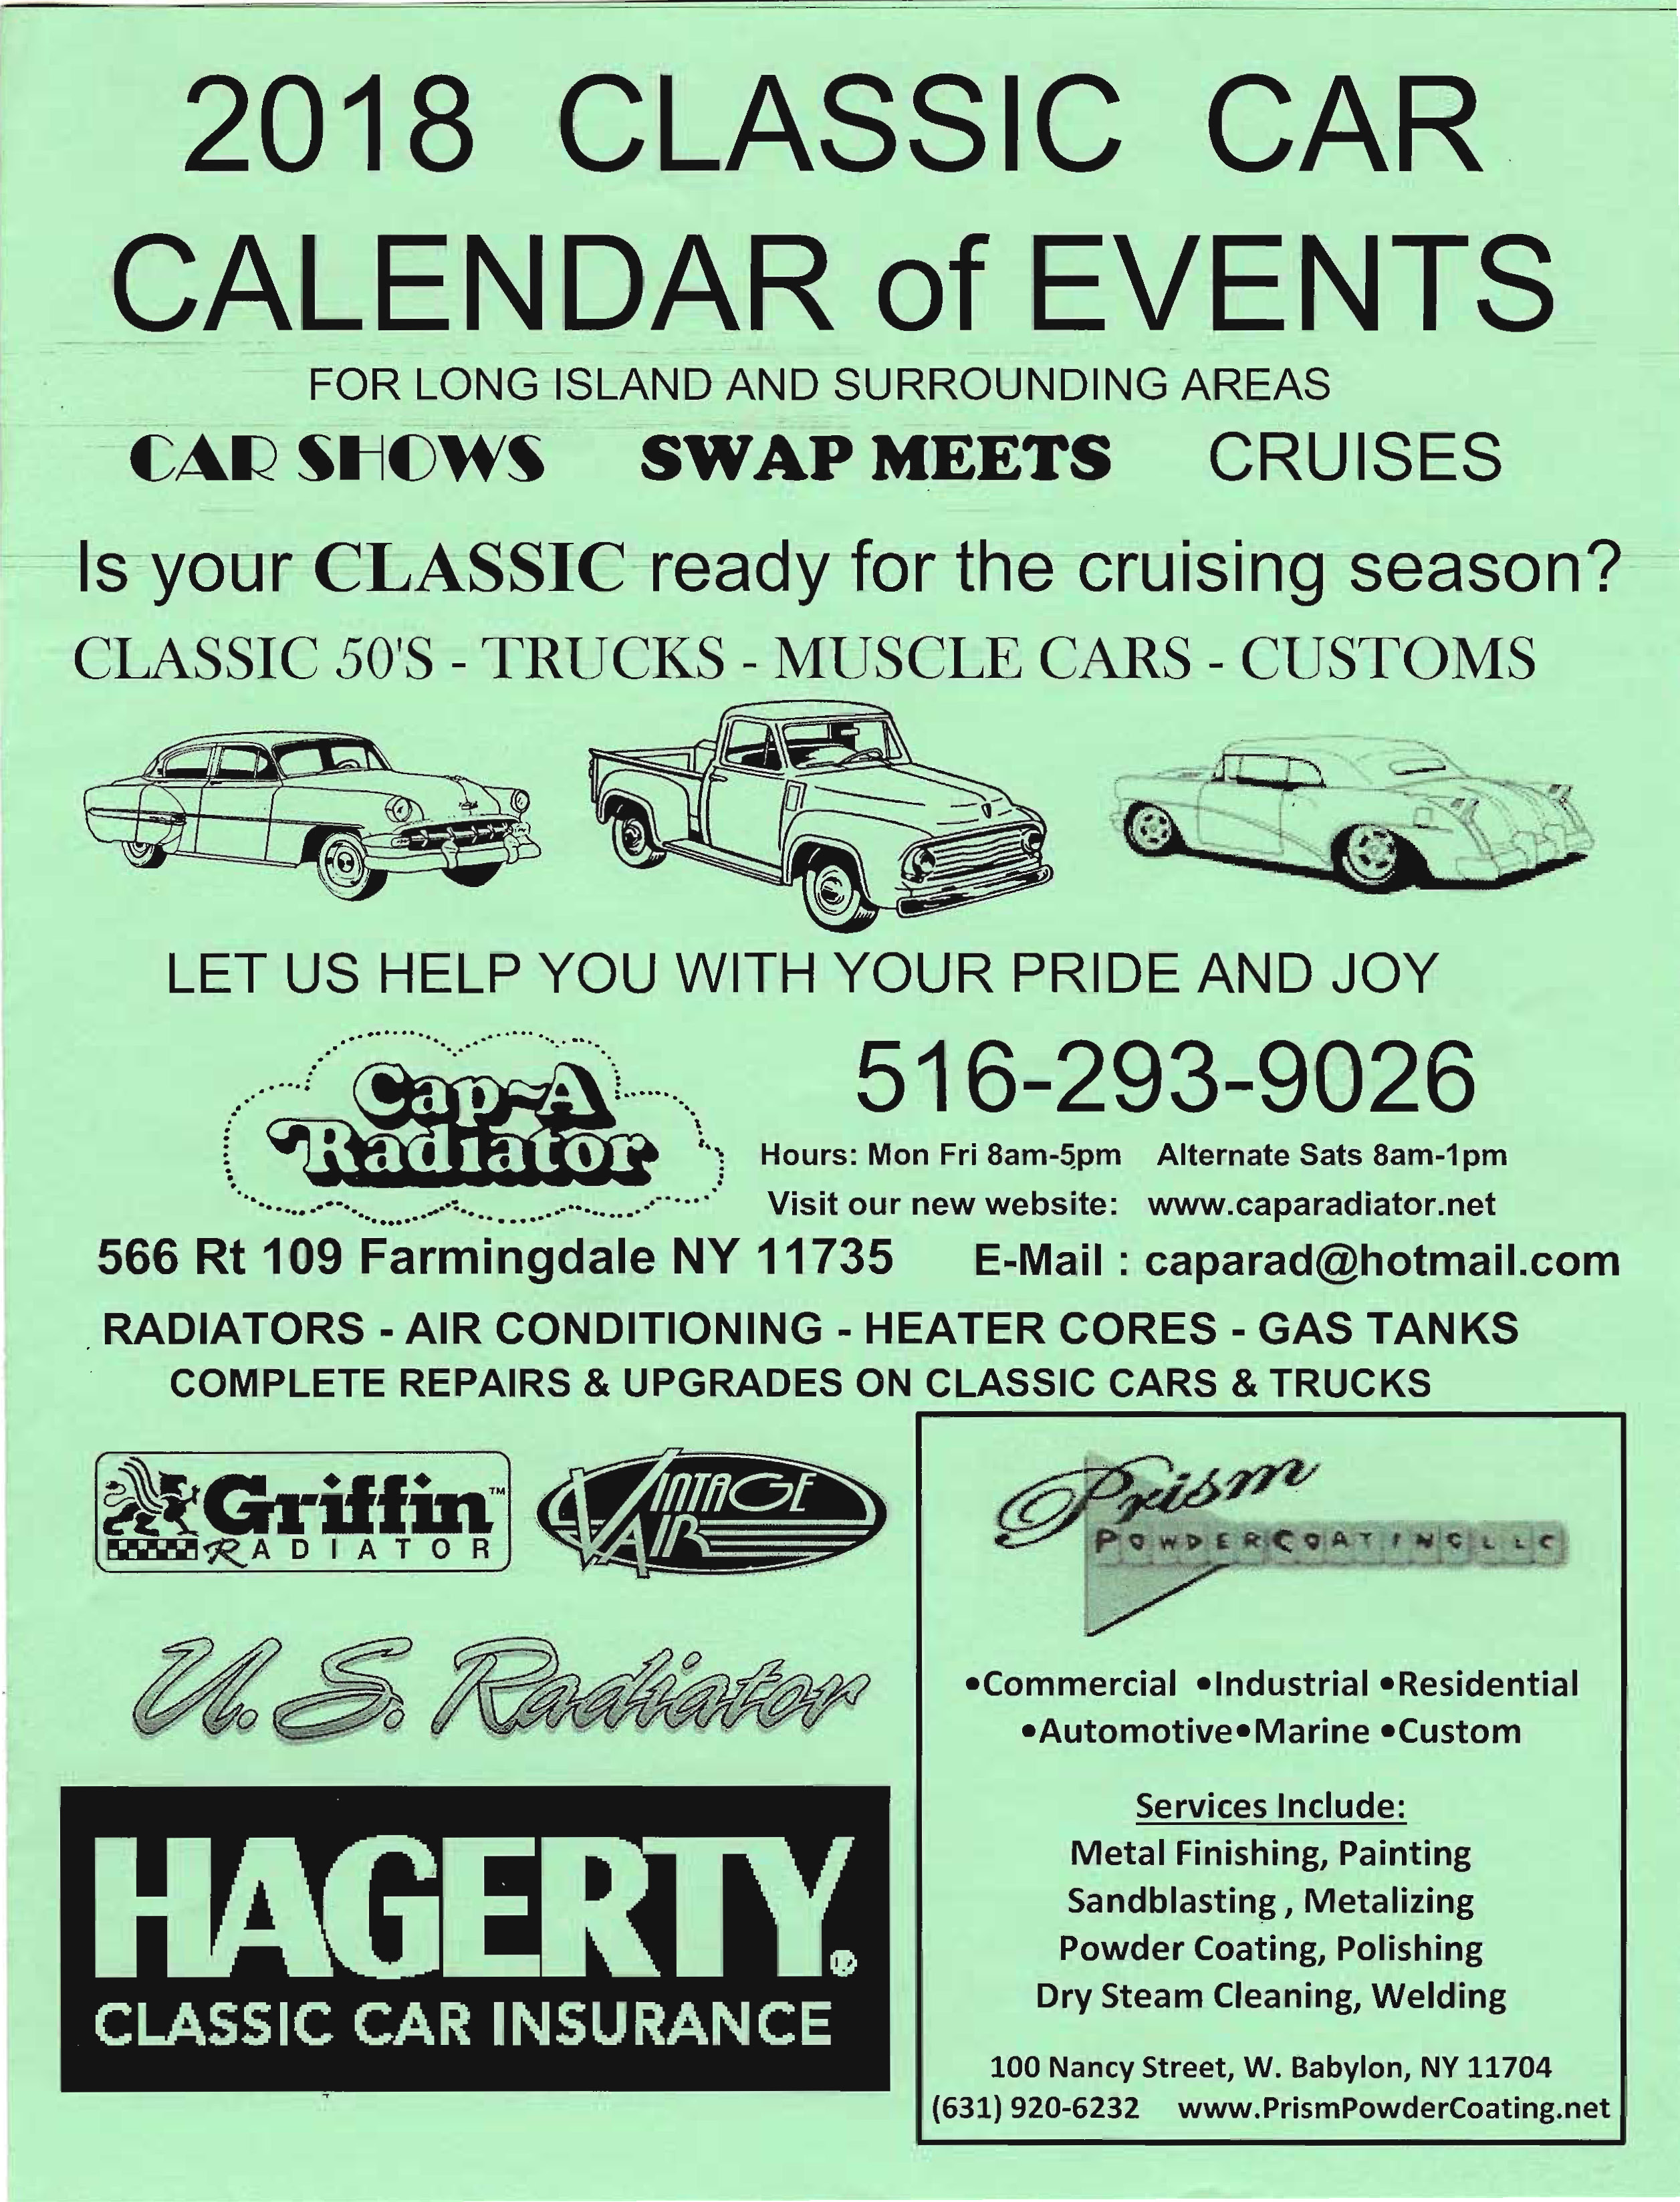 2018 Classic Car Calendar of Events First Edition through July Page 1